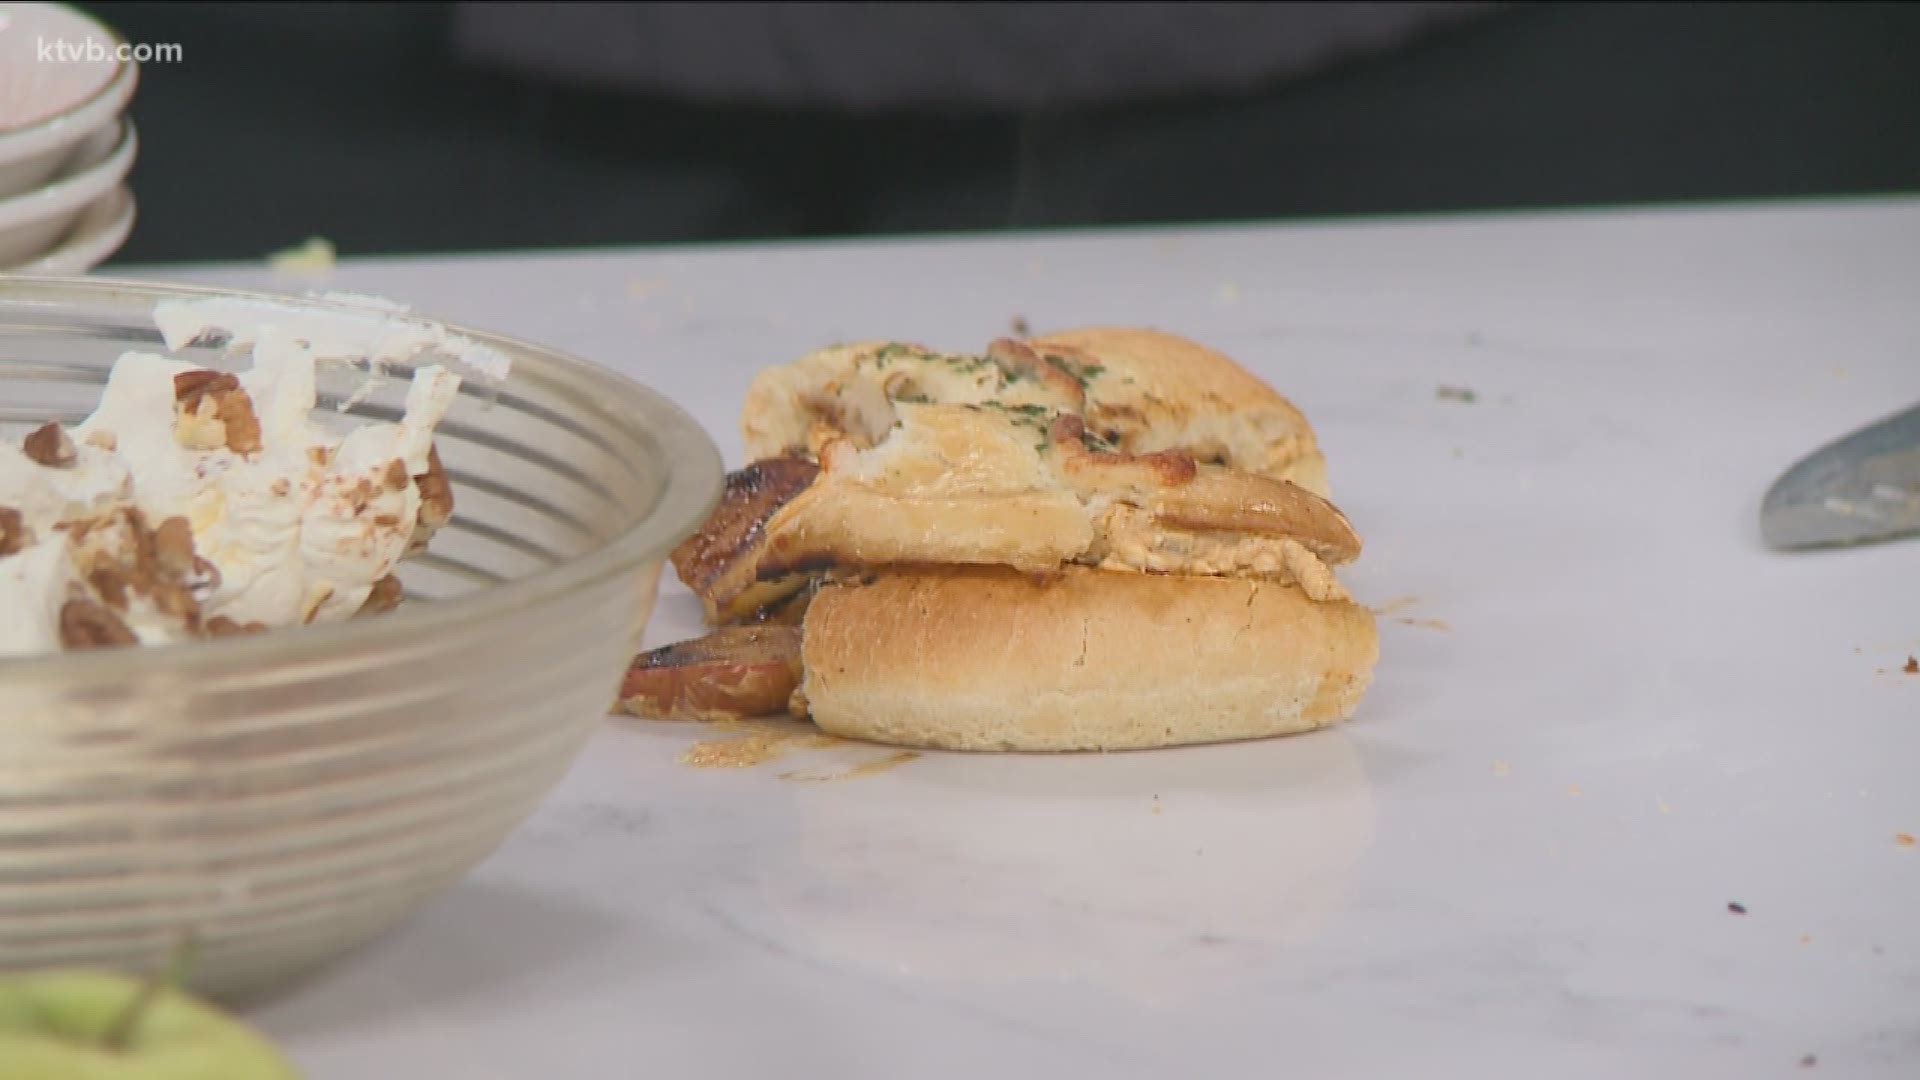 Chef Lou from the Westside Drive In shows how to make a fall sandwich.